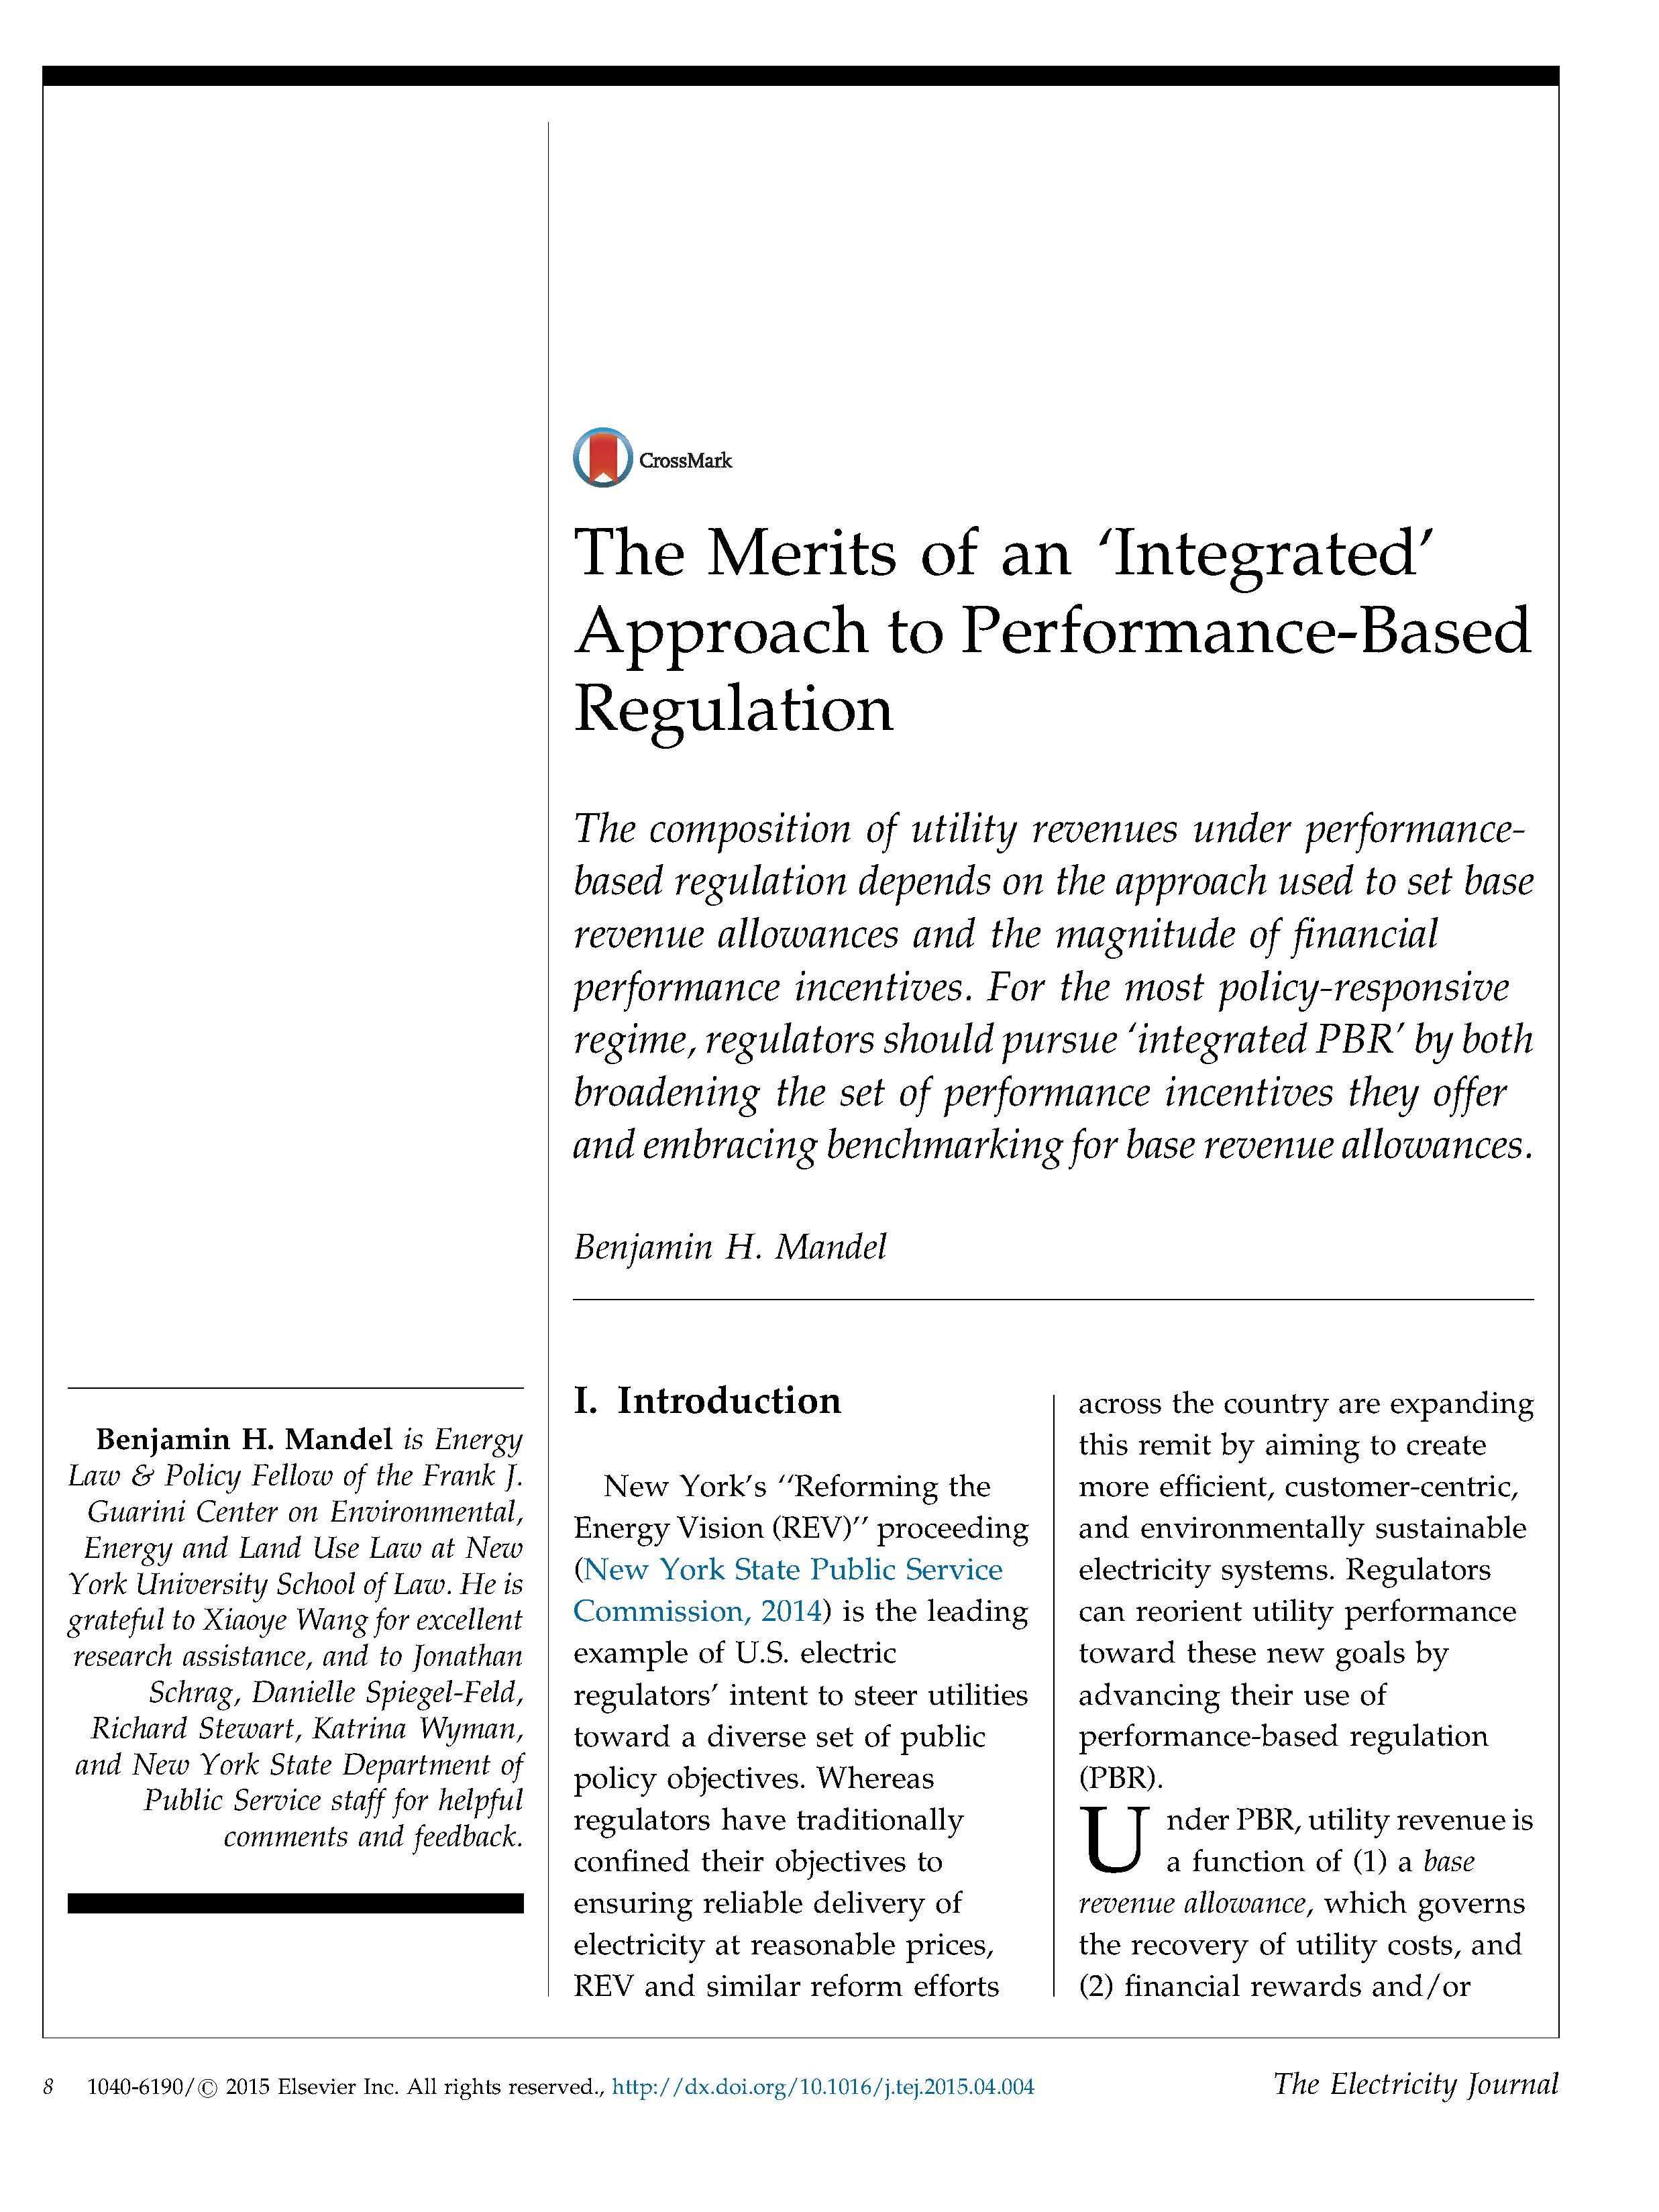 The Merits of an ‘Integrated’ Approach to Performance-Based Regulation